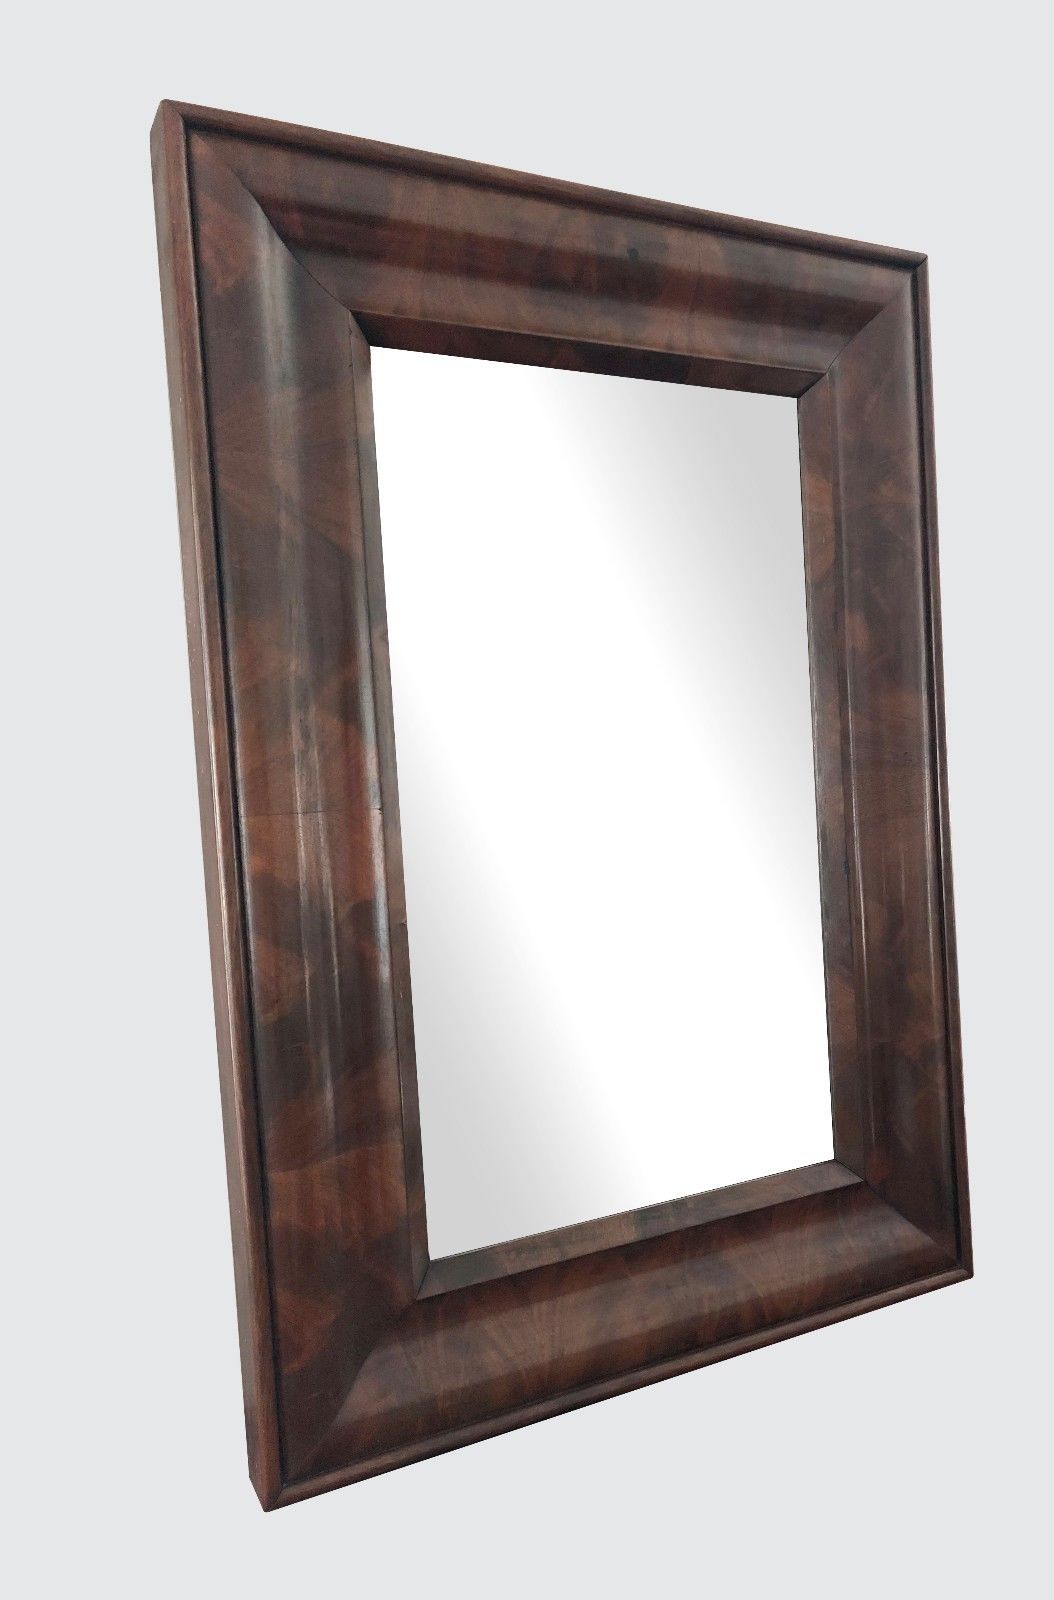 EARLY 19TH CENTURY CLASSICAL HEAVY PLATE BEVELED GLASS MIRROR